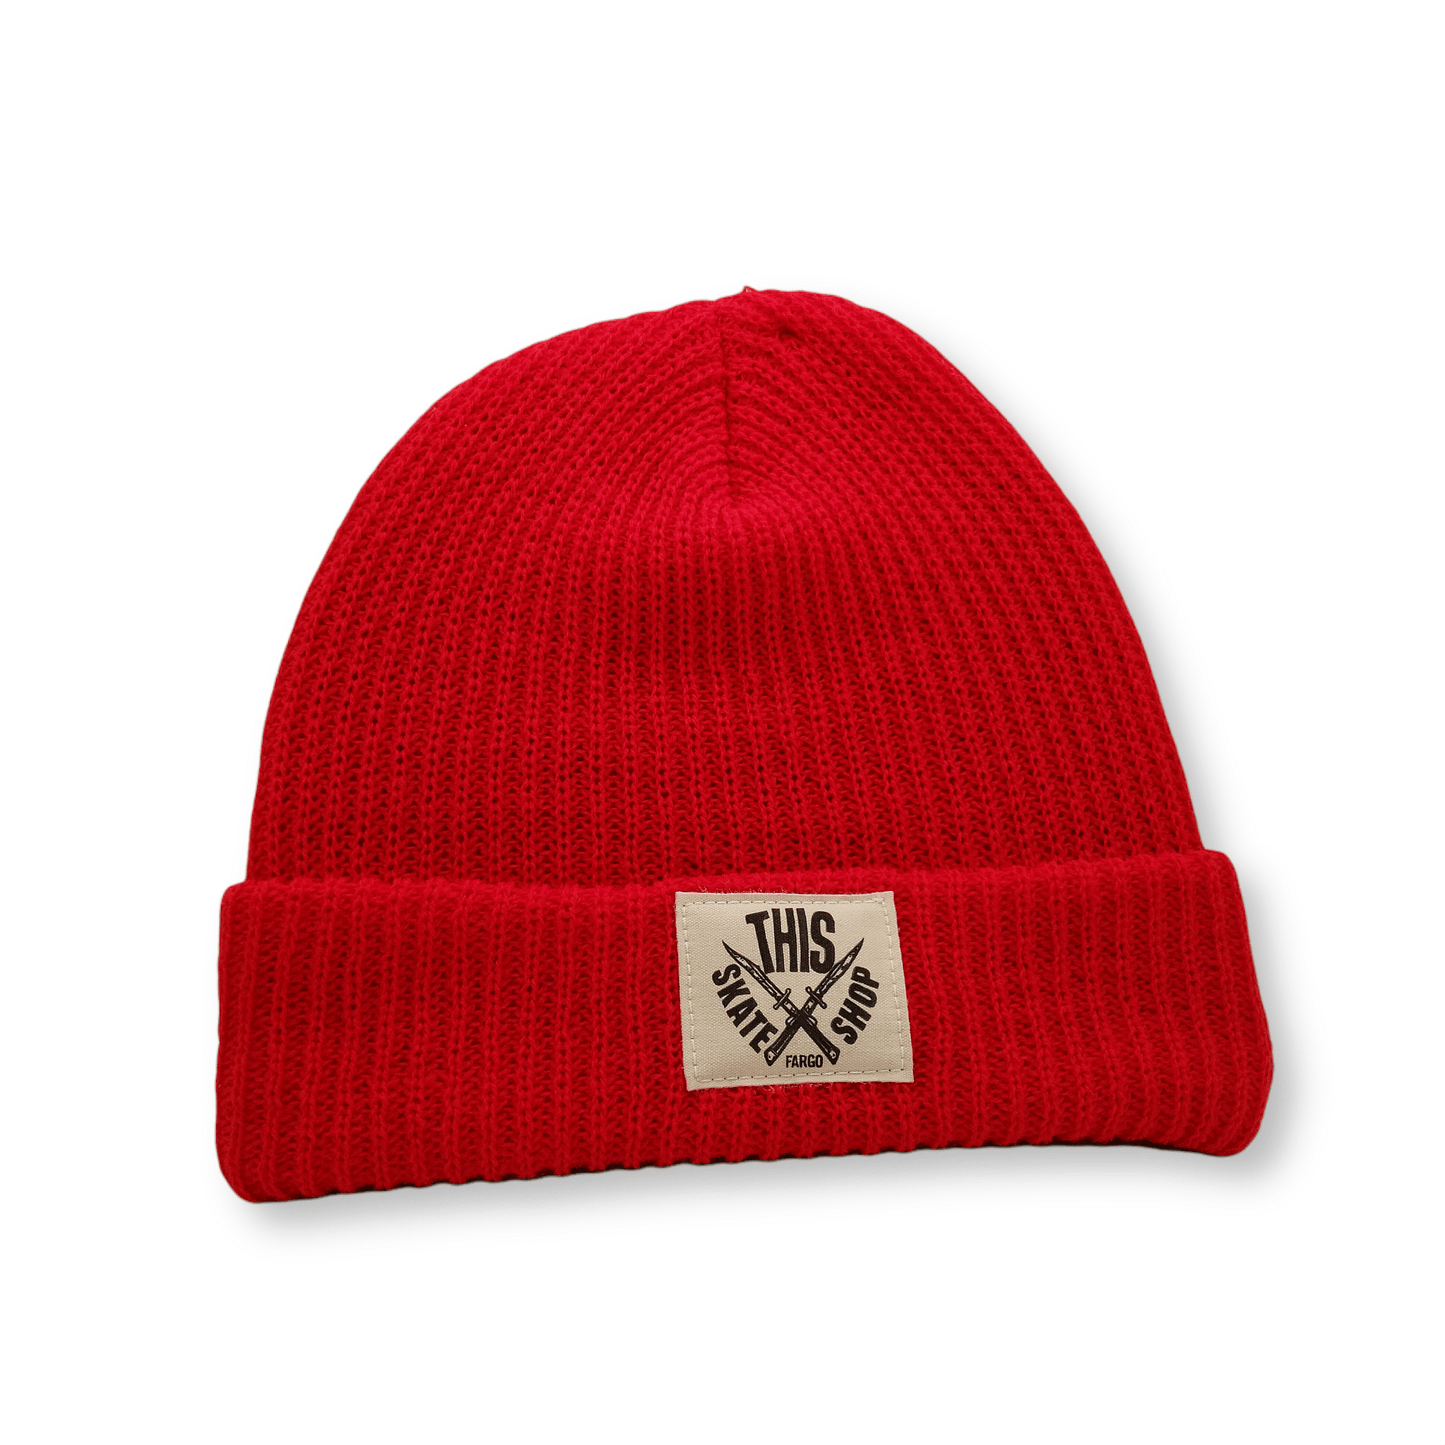 THIS Skateshop | Knit Beanie - Red/White Patch